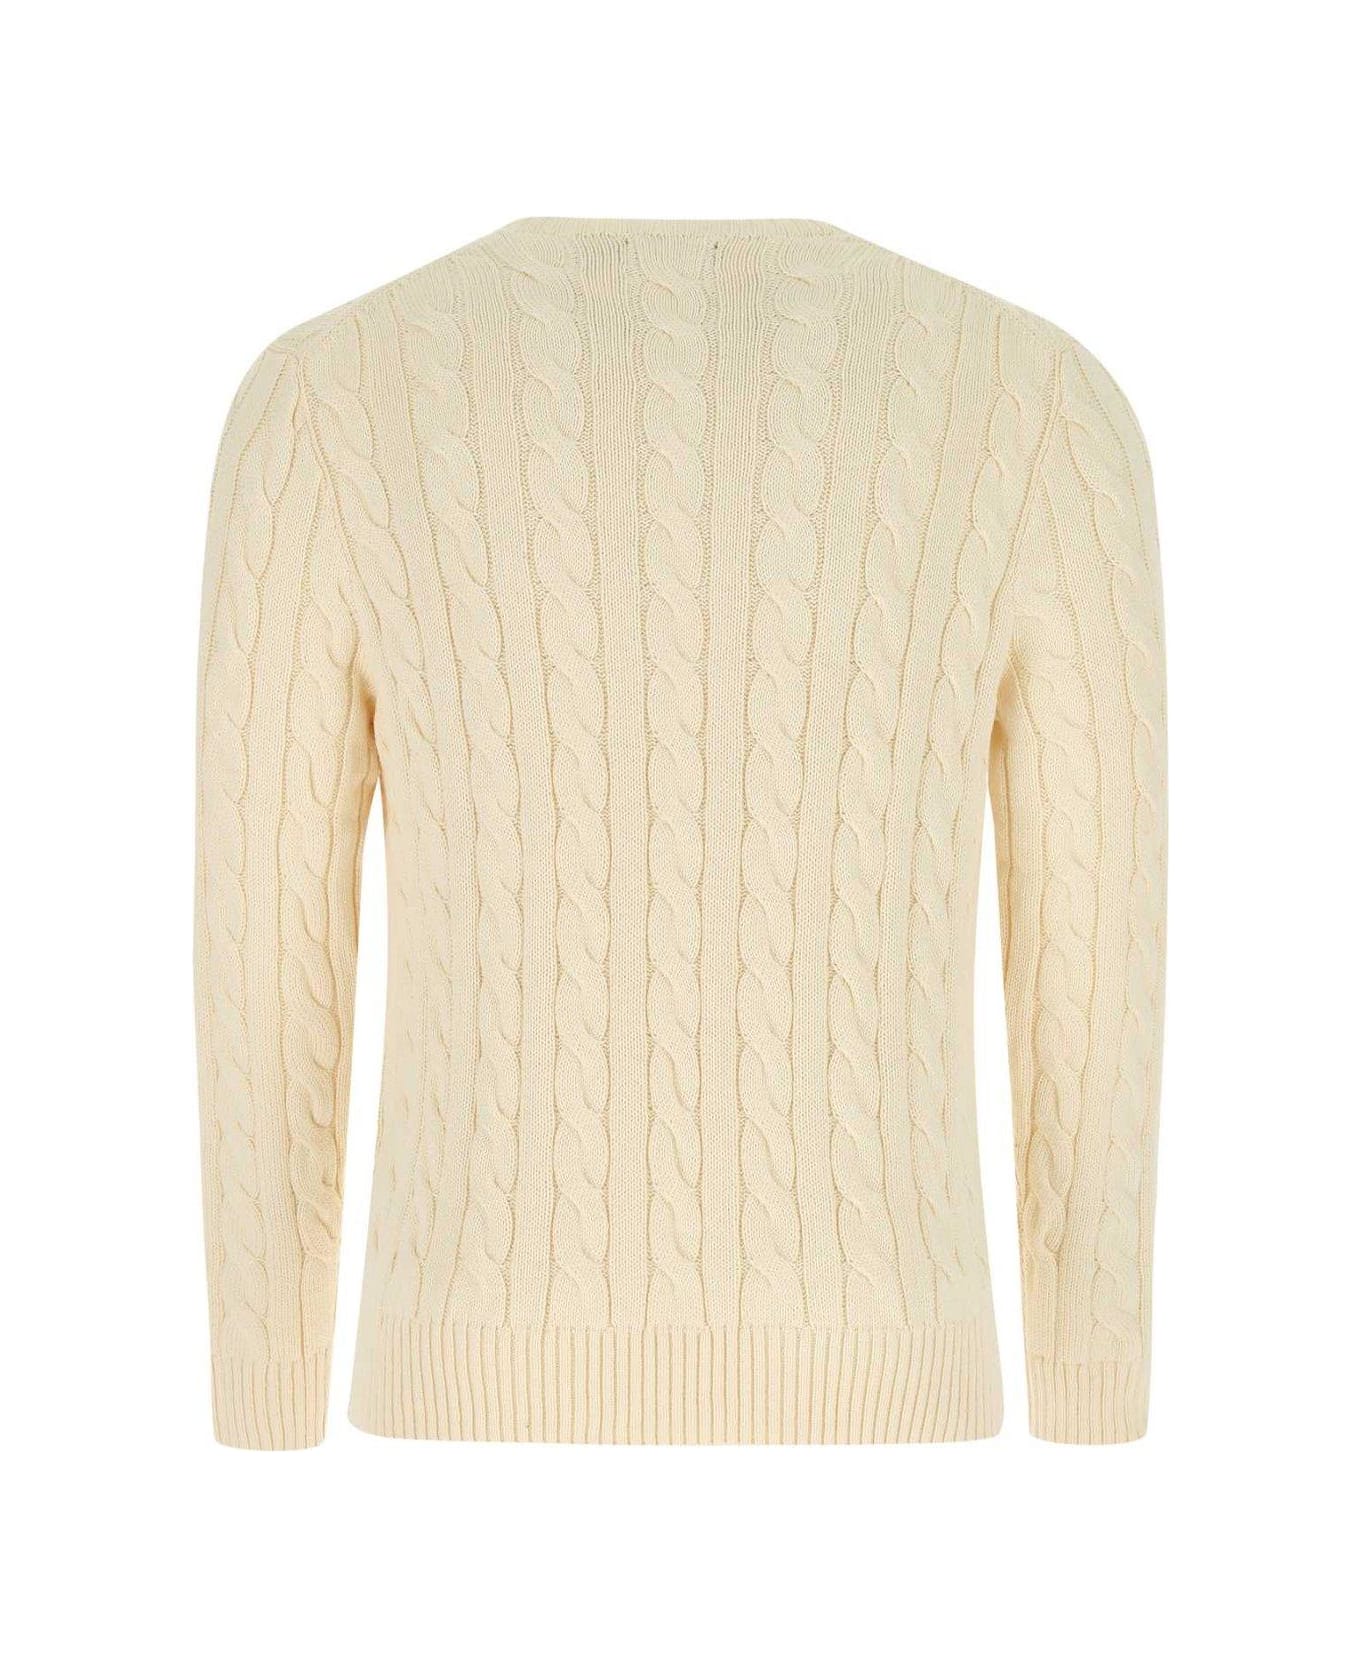 Polo Ralph Lauren Logo Embroidered Cable Knitted Jumper - Andover Cream